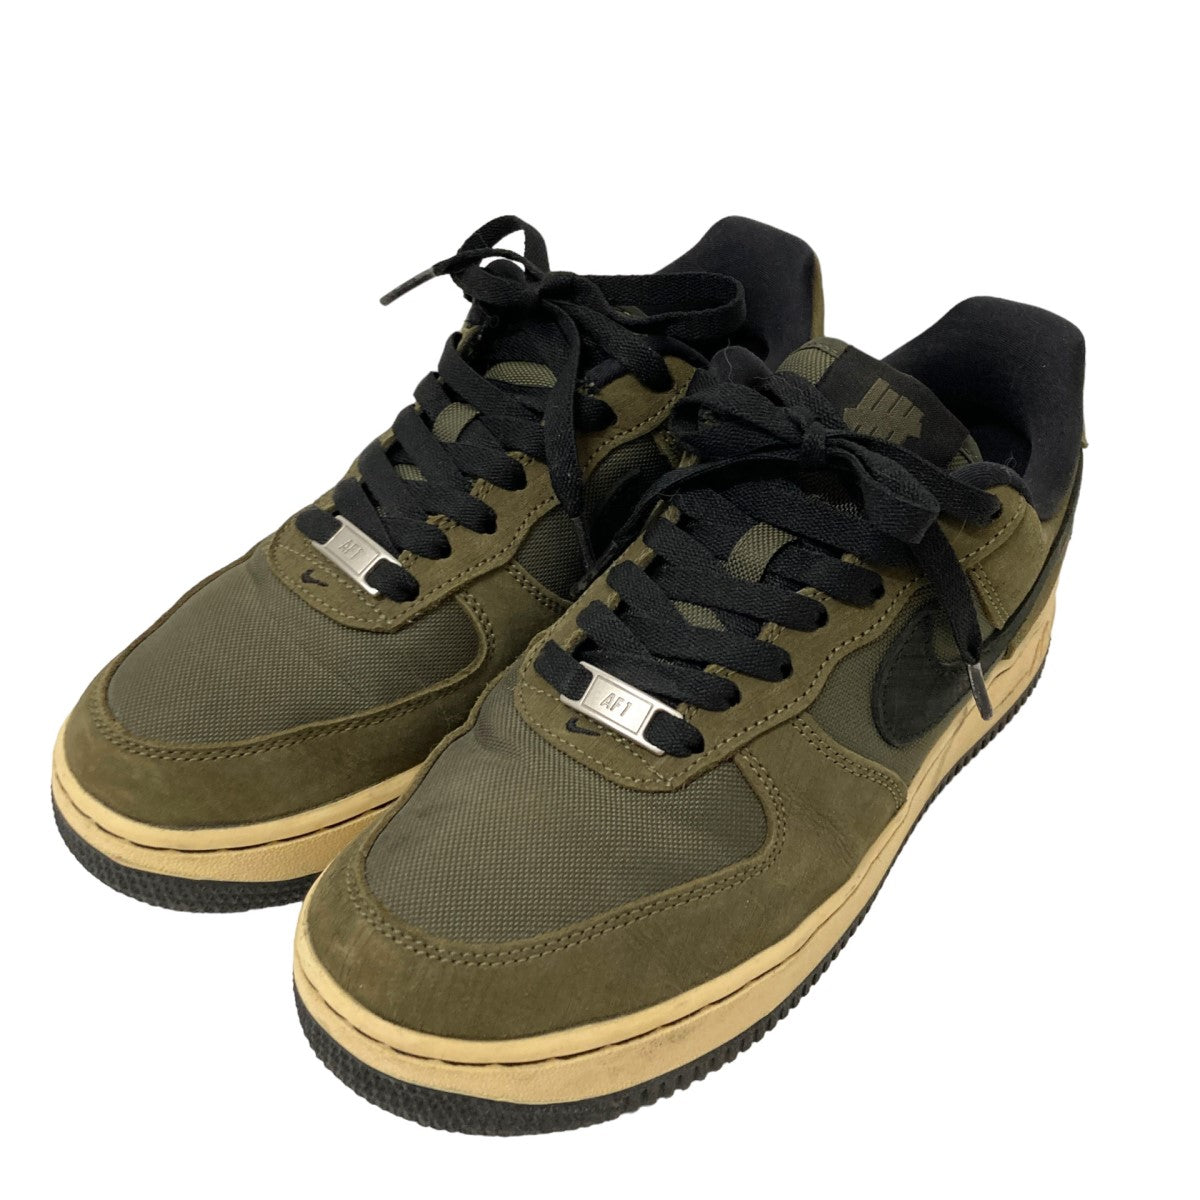 NIKE×UNDEFEATED AIR FORCE 1 LOW SP スニーカー DH3064-300 DH3064 ...